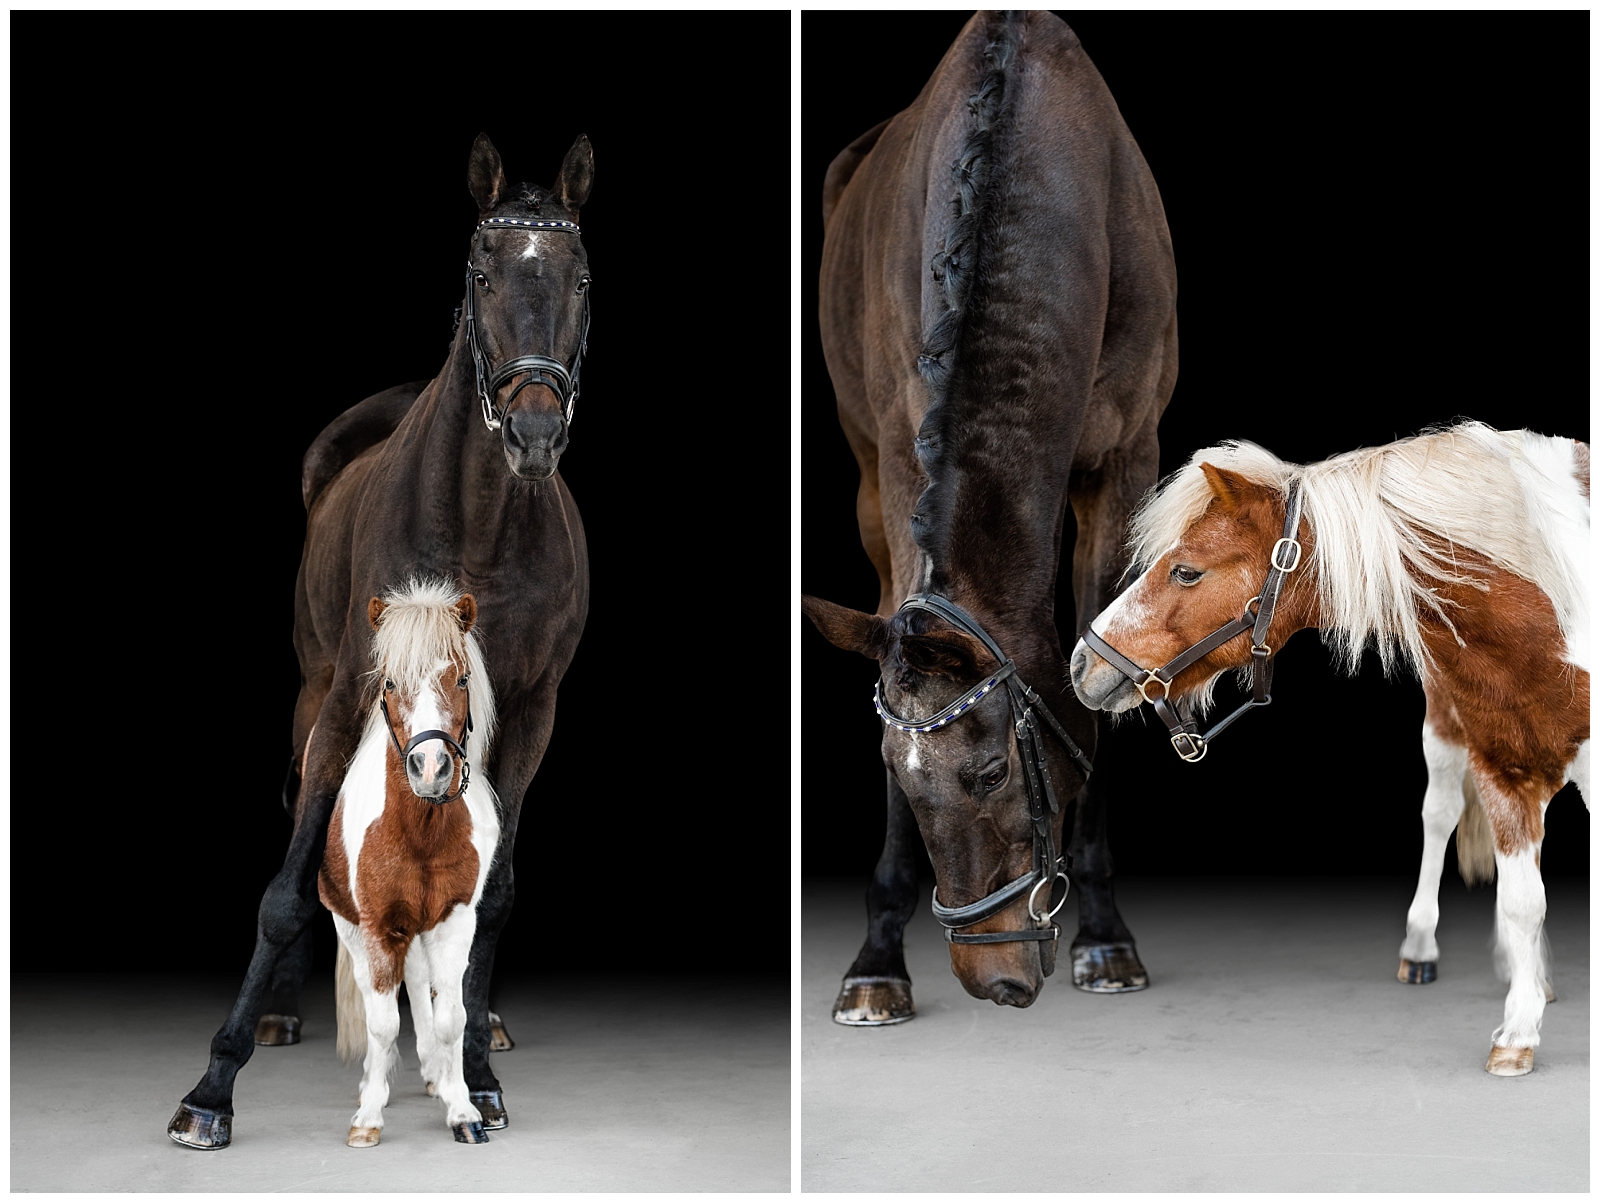 A Thoroughbred and a Miniature horse are bestfriends. Photographed together on a black background in Northwest Florida. Painted Oak Photography.